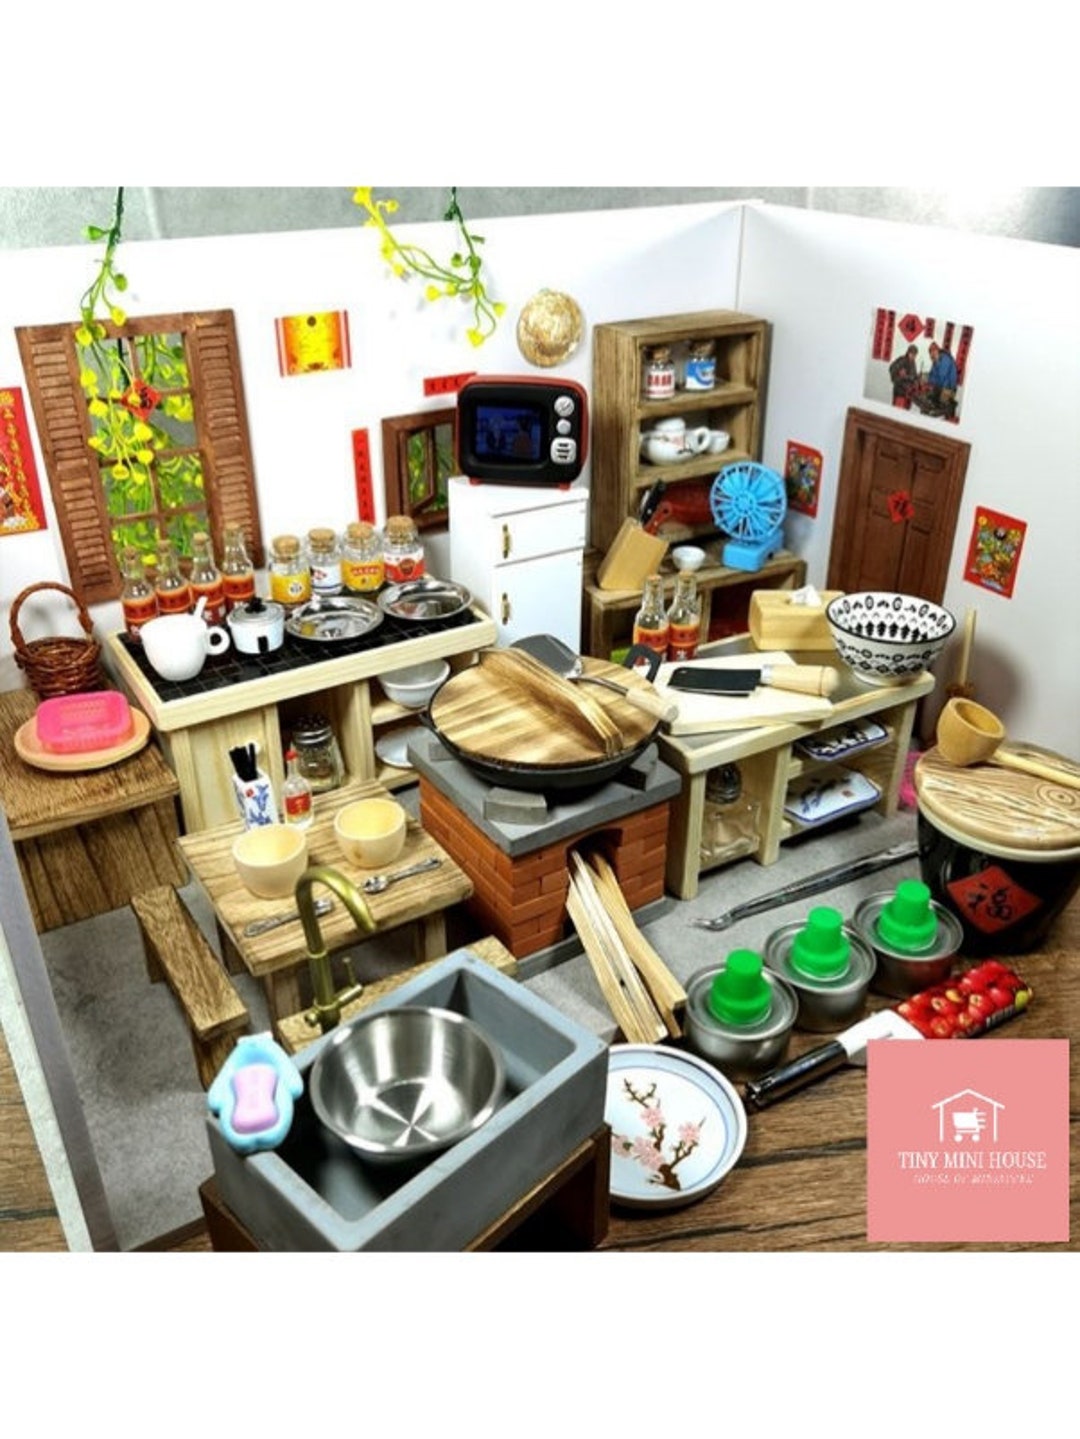 Custom Your Own Miniature kitchen set (include real stove, sink, furniture,  and cookwares to cook tiny food)